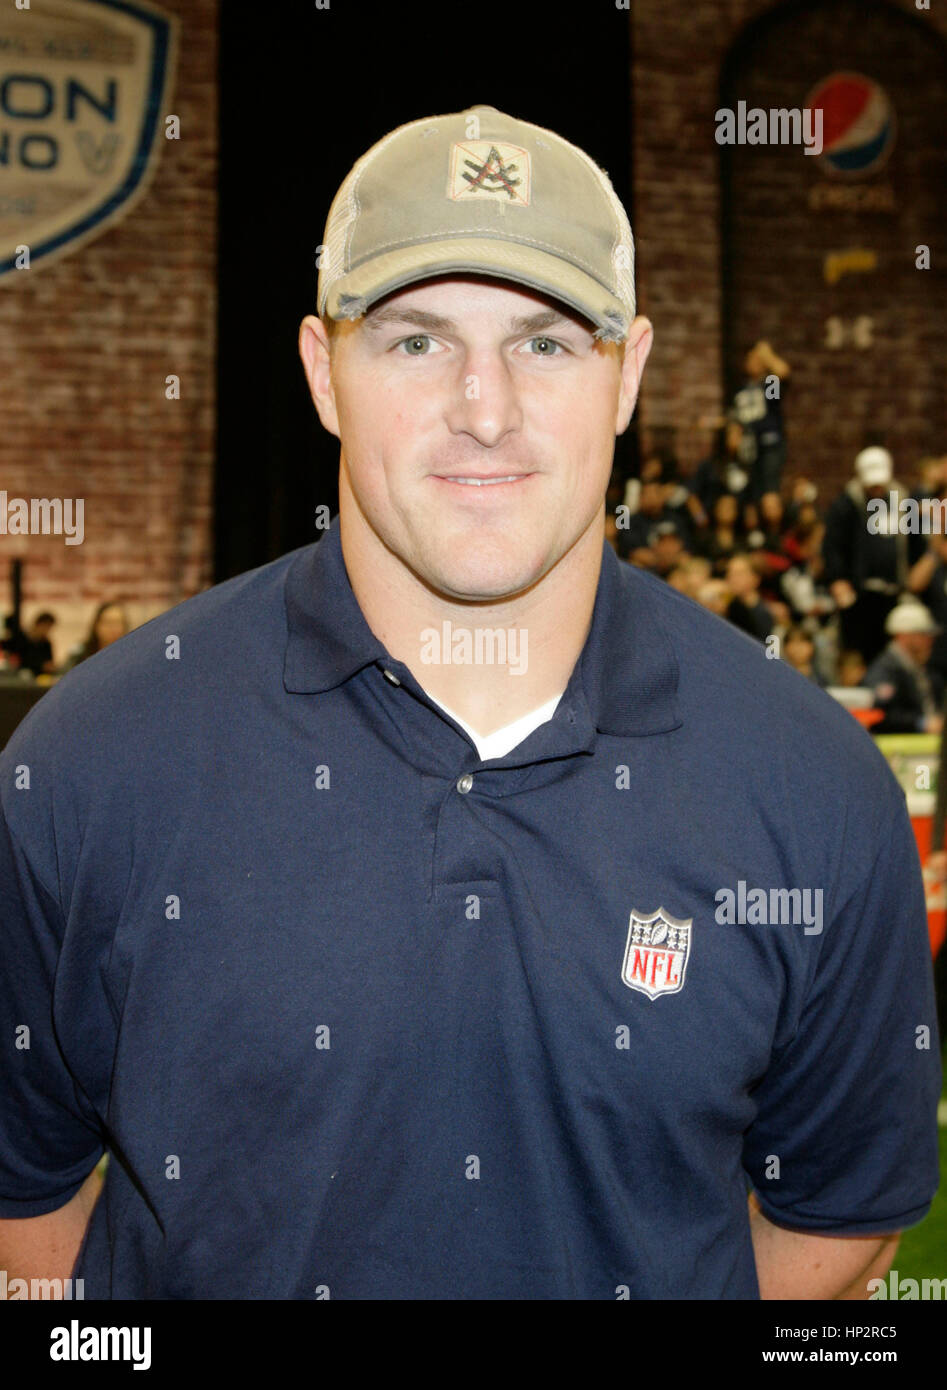 Dallas Cowboys' Jason Witten at the Tazon Latino V flag football game at Super Bowl NFL Experience at the Dallas Convention Center on February 2, 2011 in Dallas, Texas. Photo by Francis Specker Stock Photo